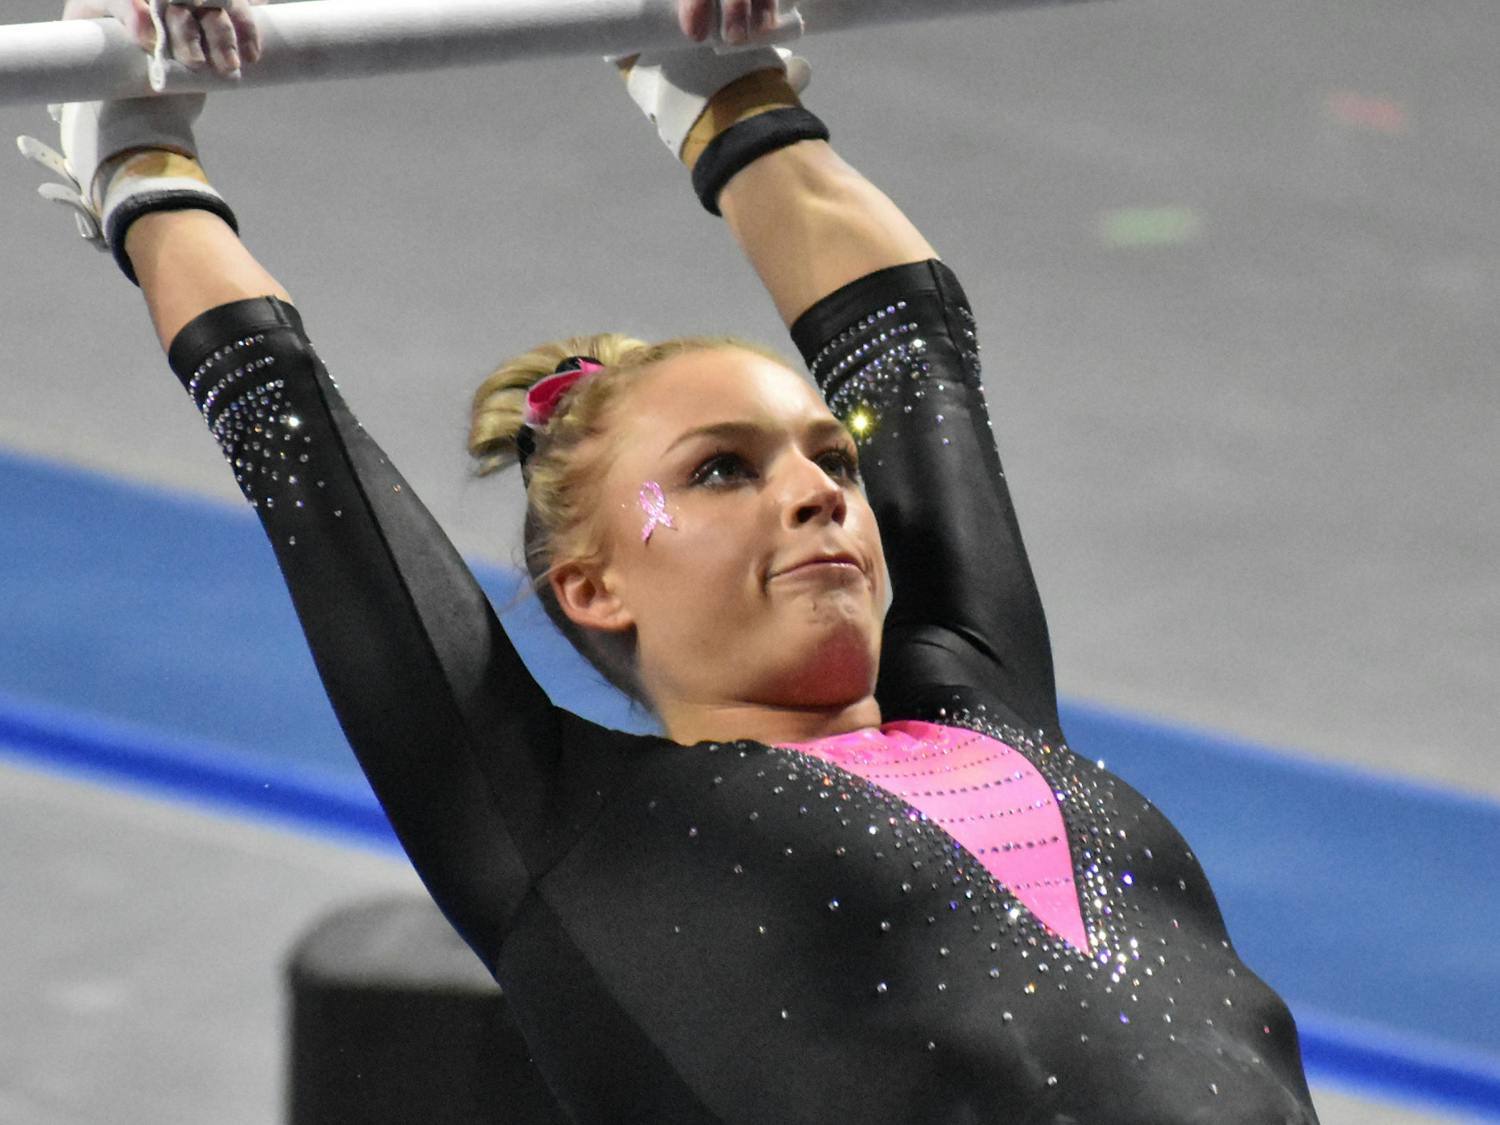 Alyssa Baumann scored a 9.925 on the uneven bars after not competing in that routine for 1,699 days.